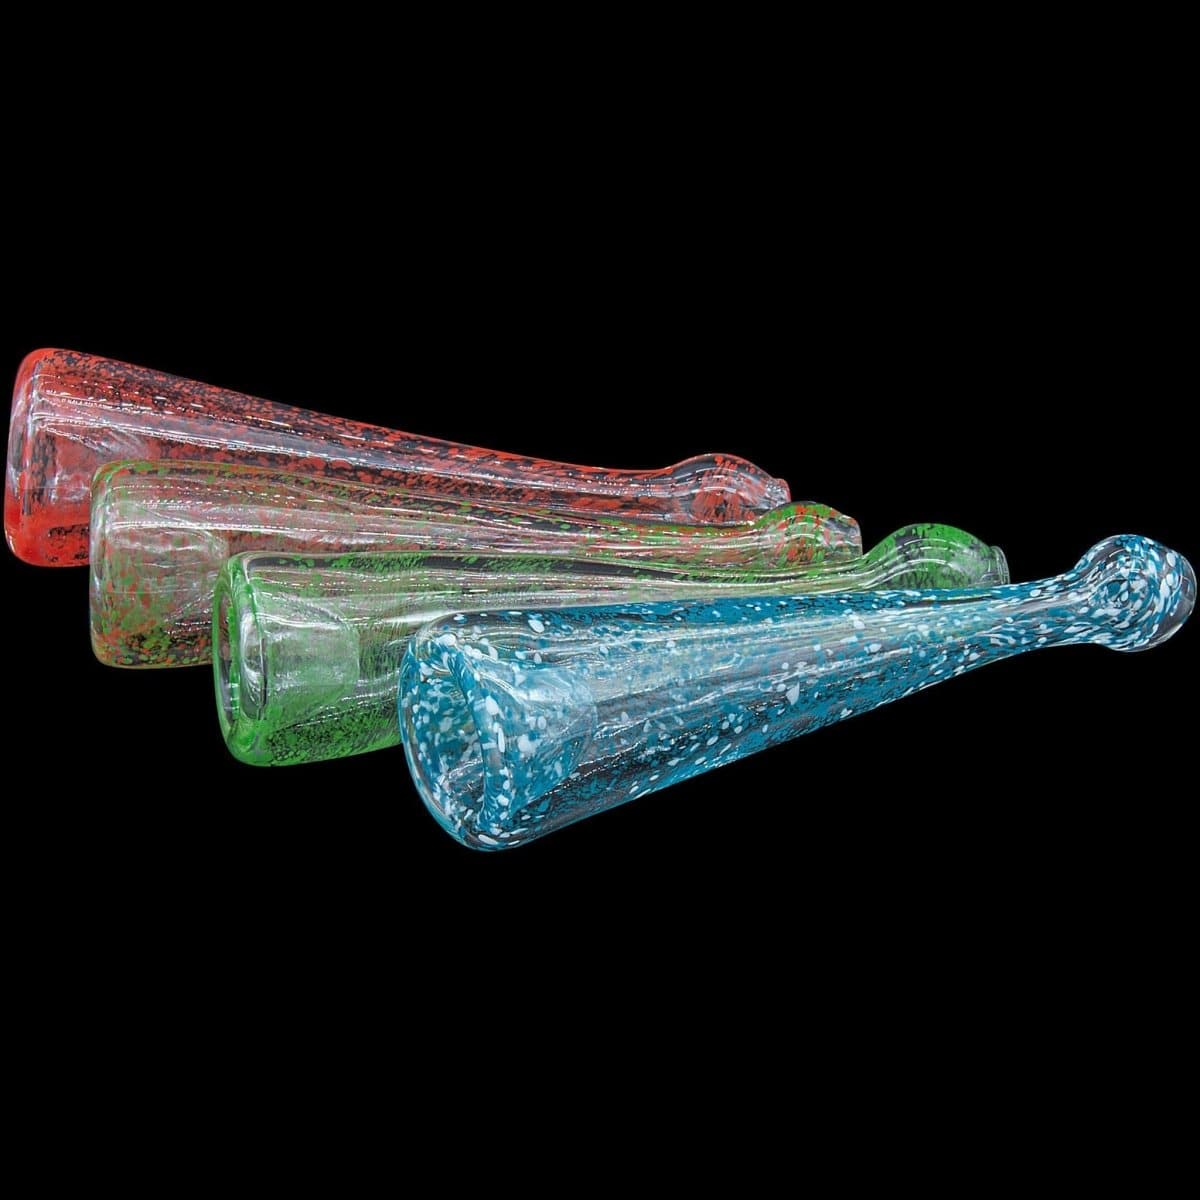 LA Pipes Hand Pipe Red Hues "Magic Dust" Frit Chillum